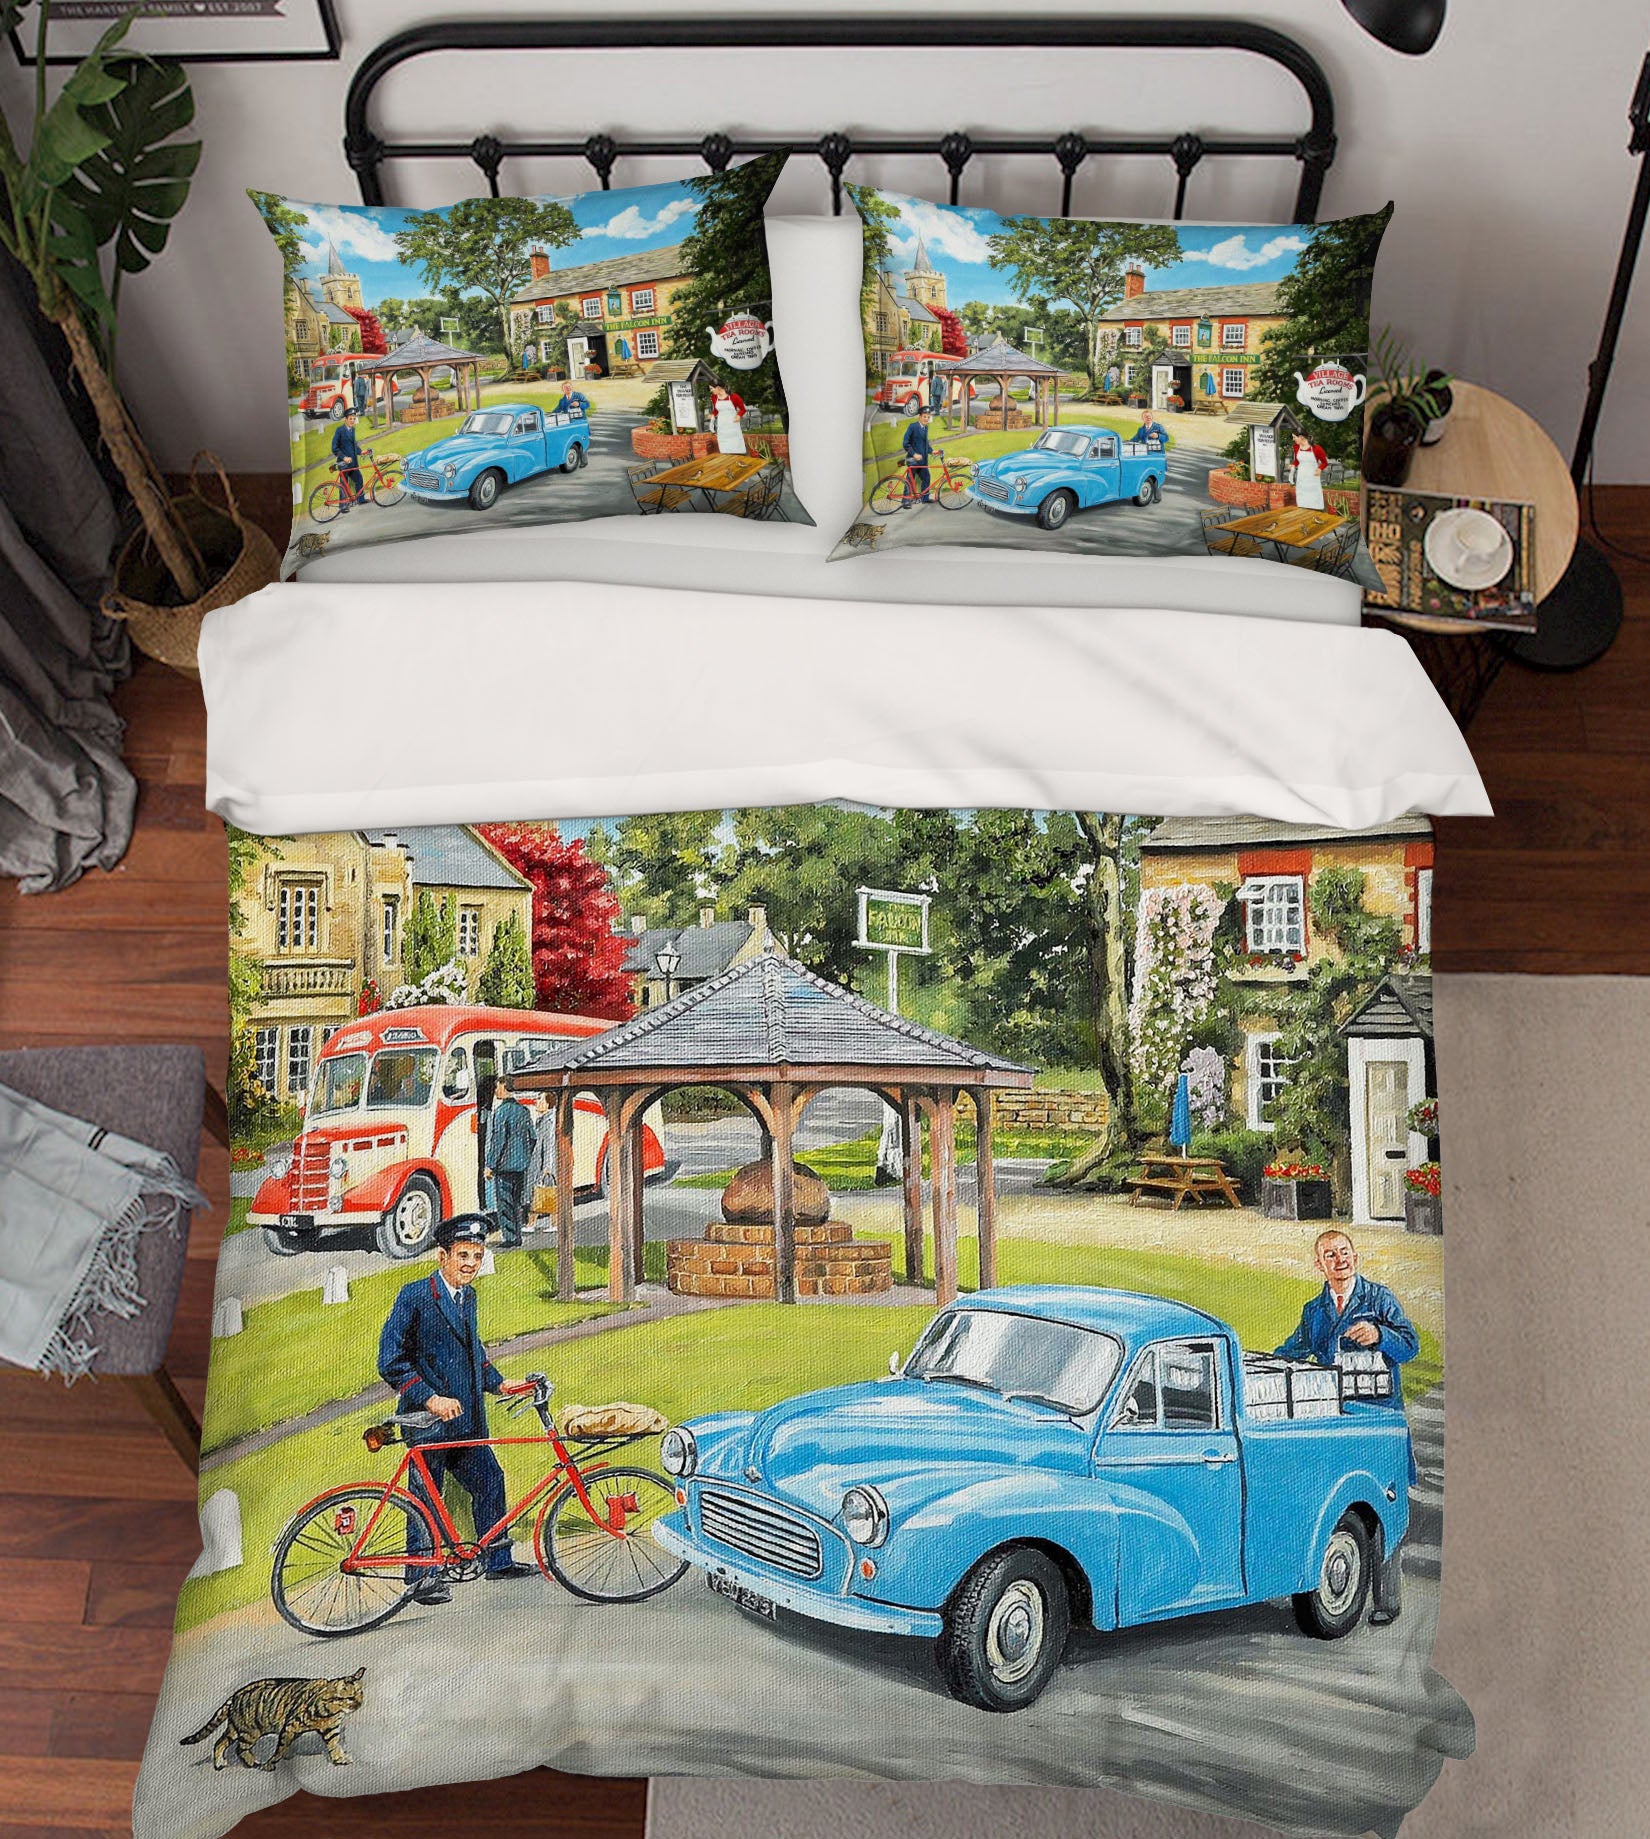 3D The Village Tearooms 2076 Trevor Mitchell bedding Bed Pillowcases Quilt